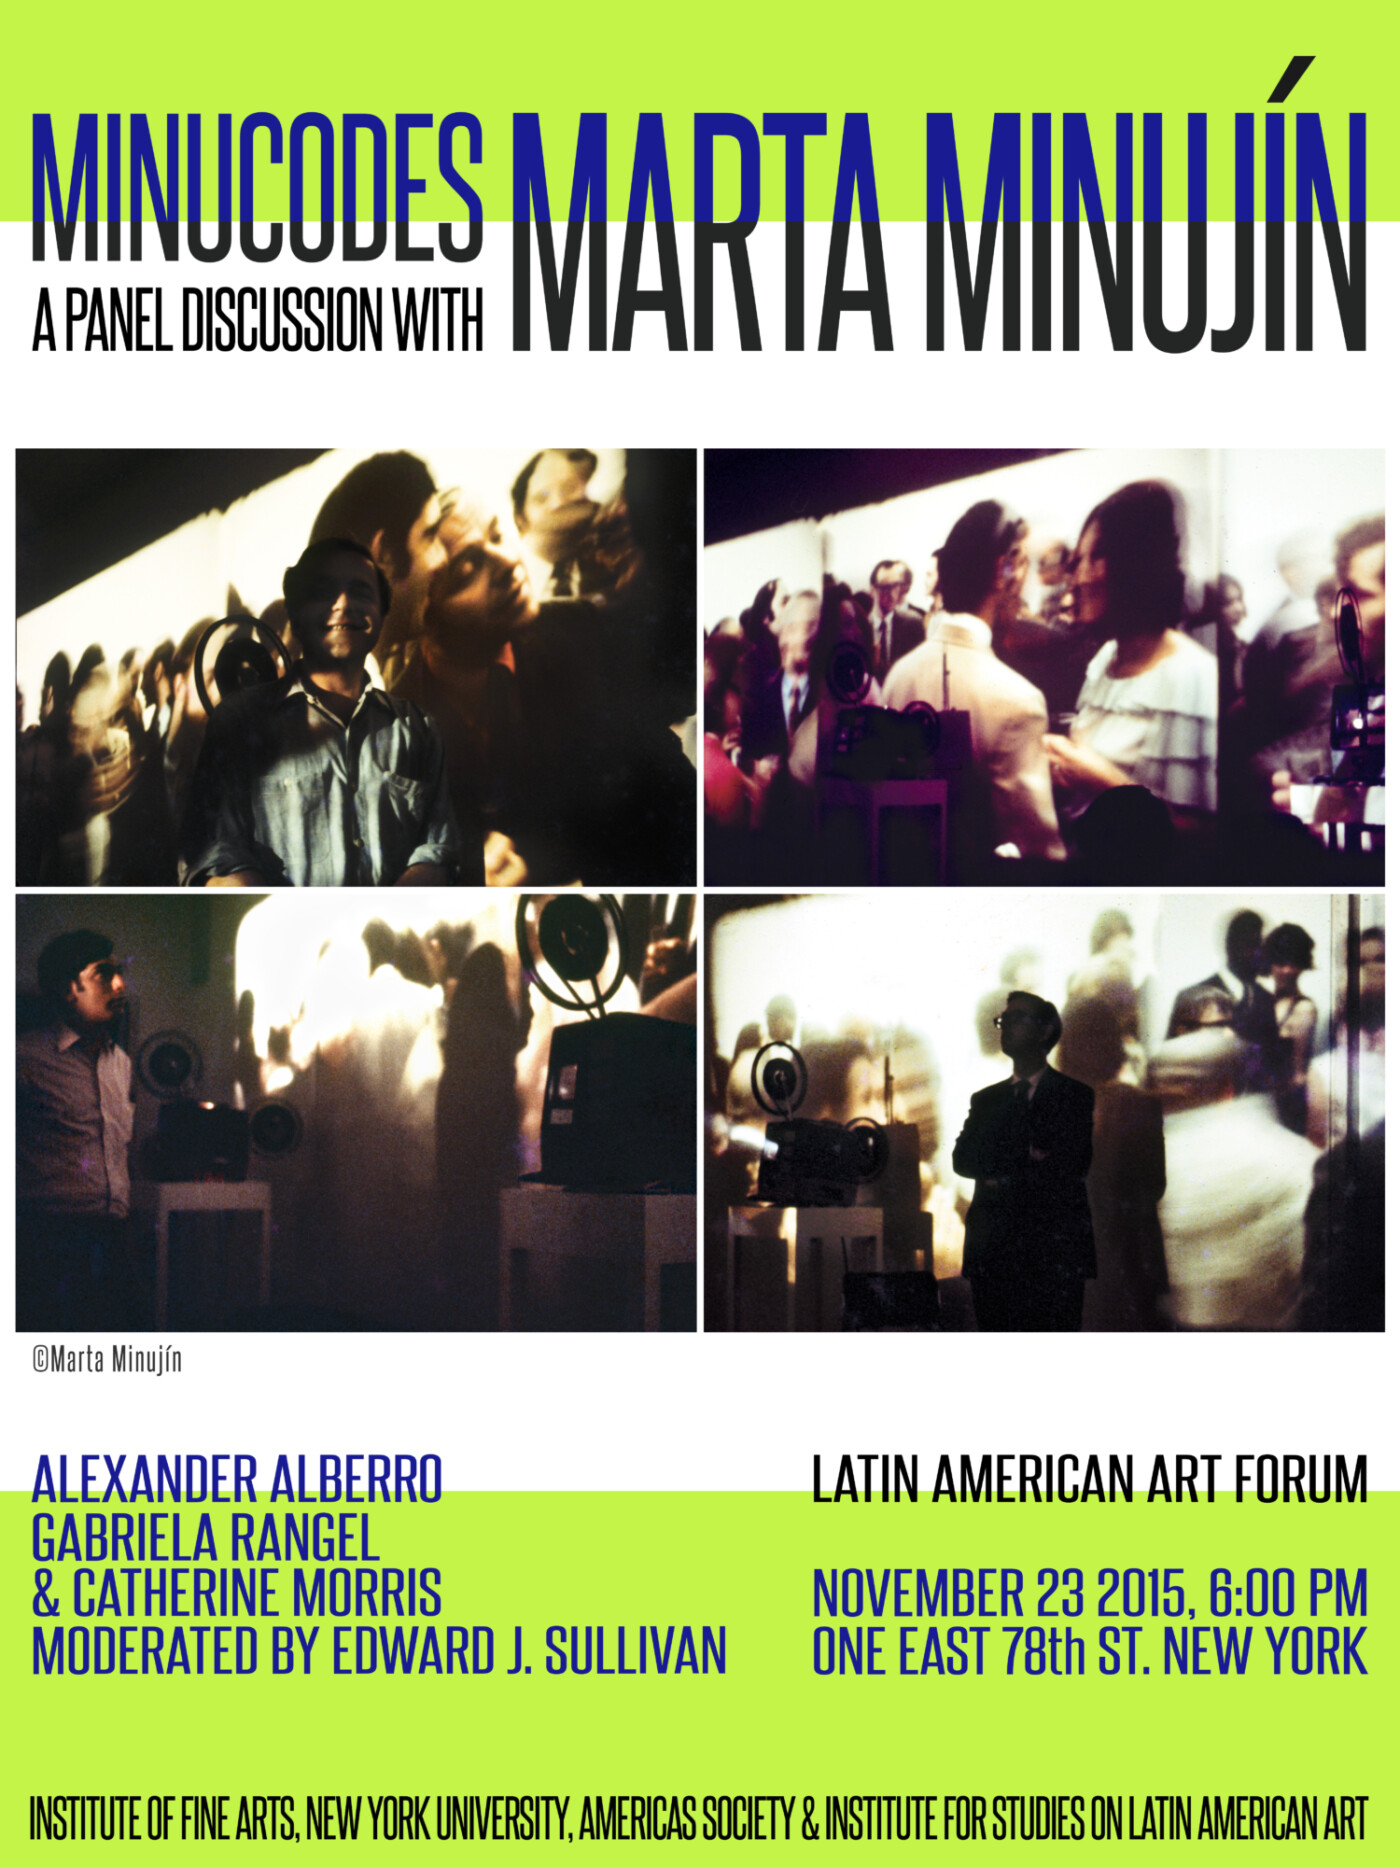 Four color images of individuals standing in front of a video projection with text describing Latin American Forum - Minucodes event.